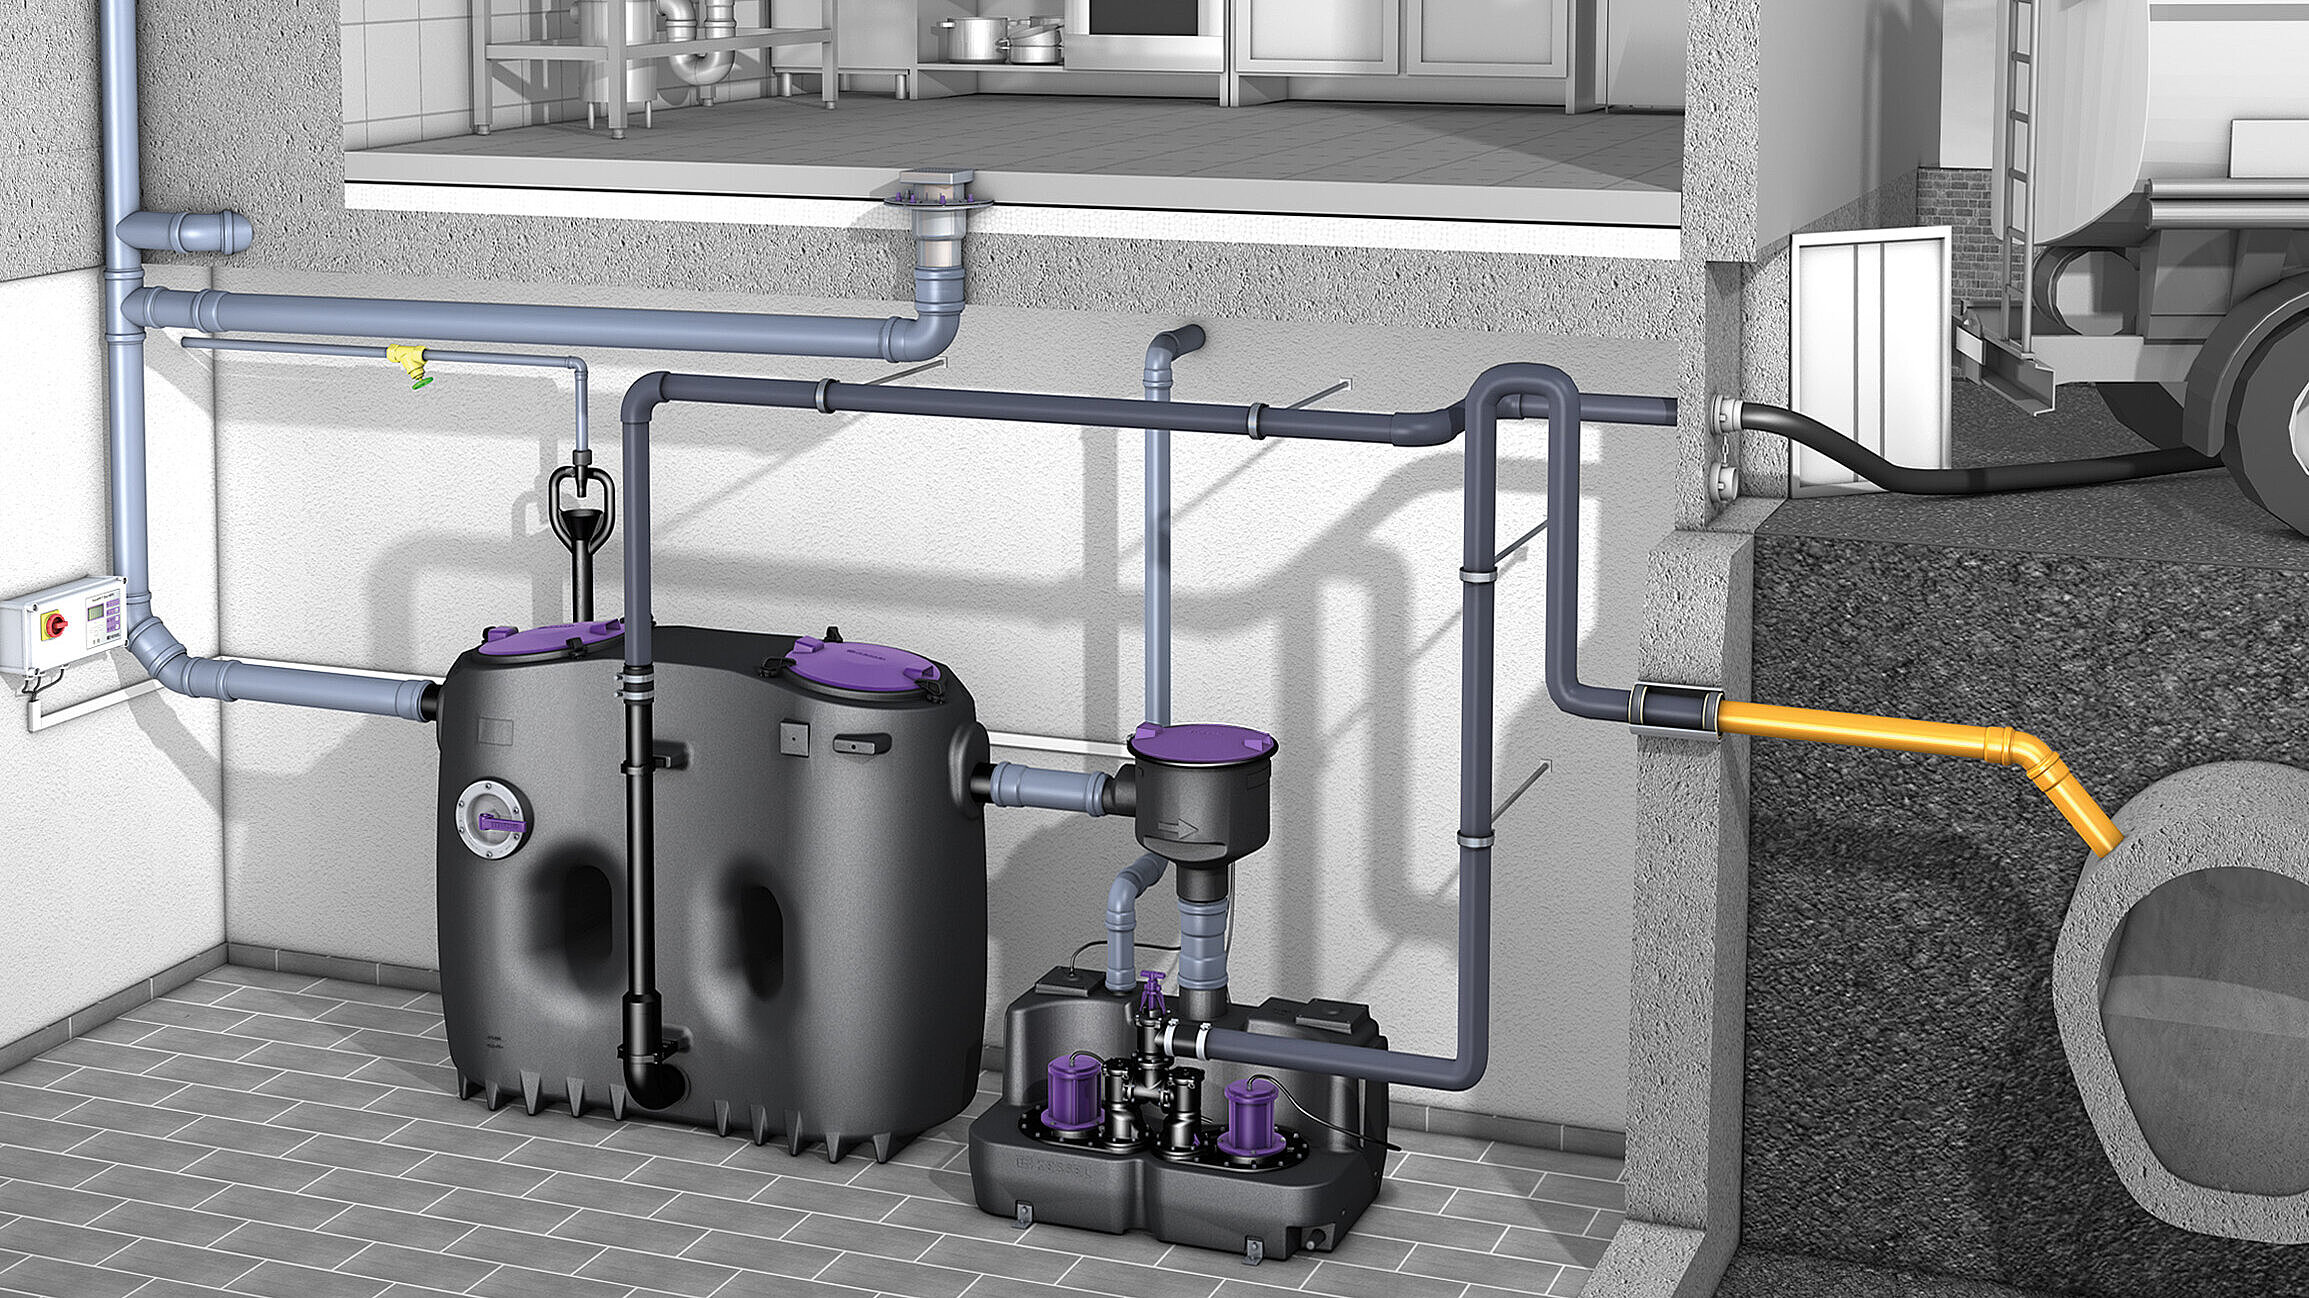 Grease separators with direct disposal connection